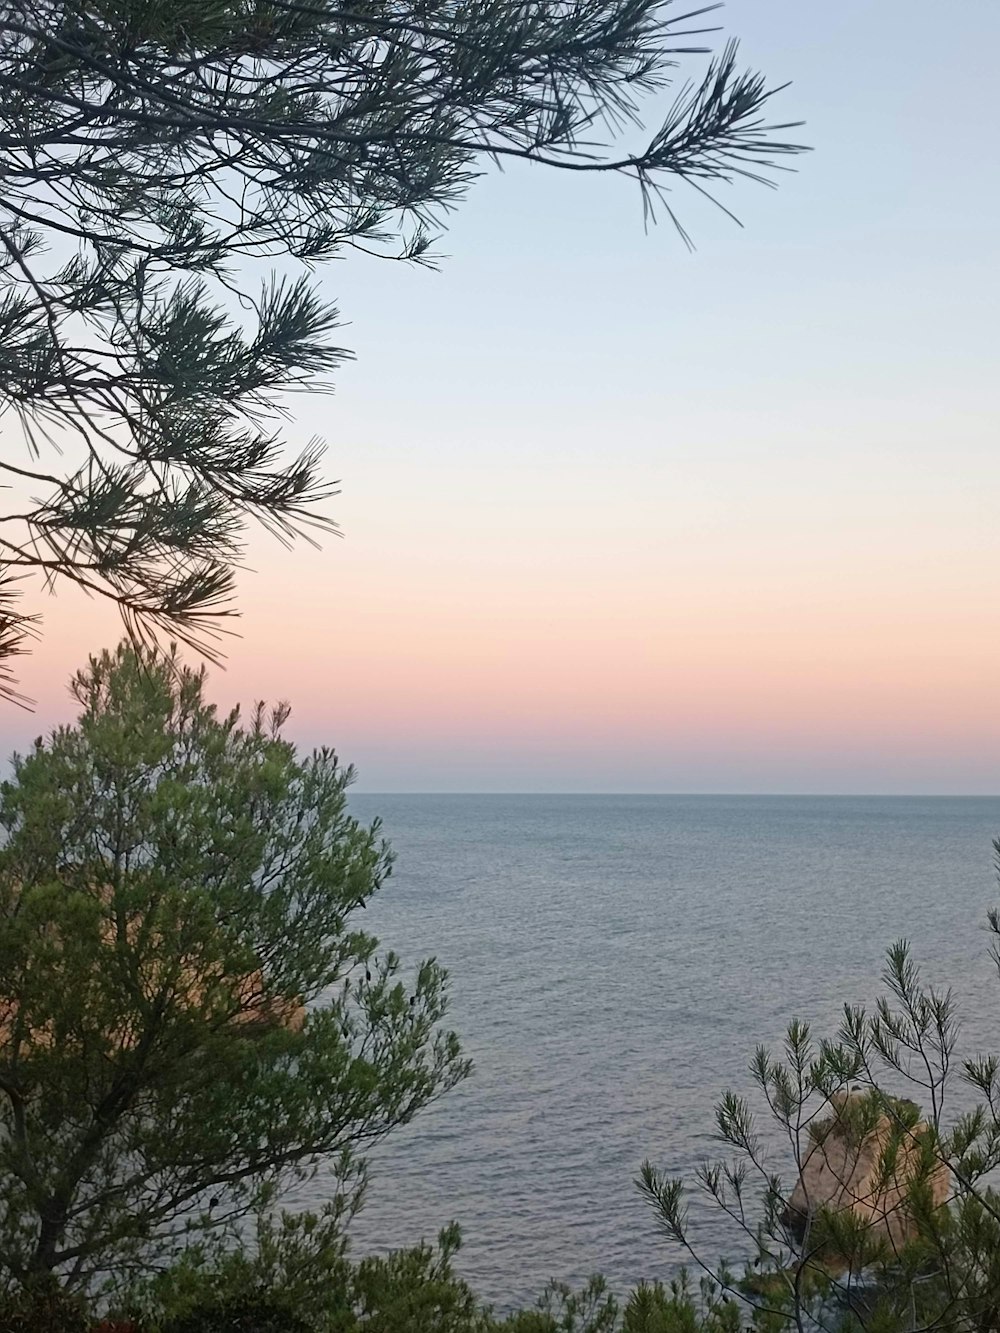 a view of the ocean through some trees